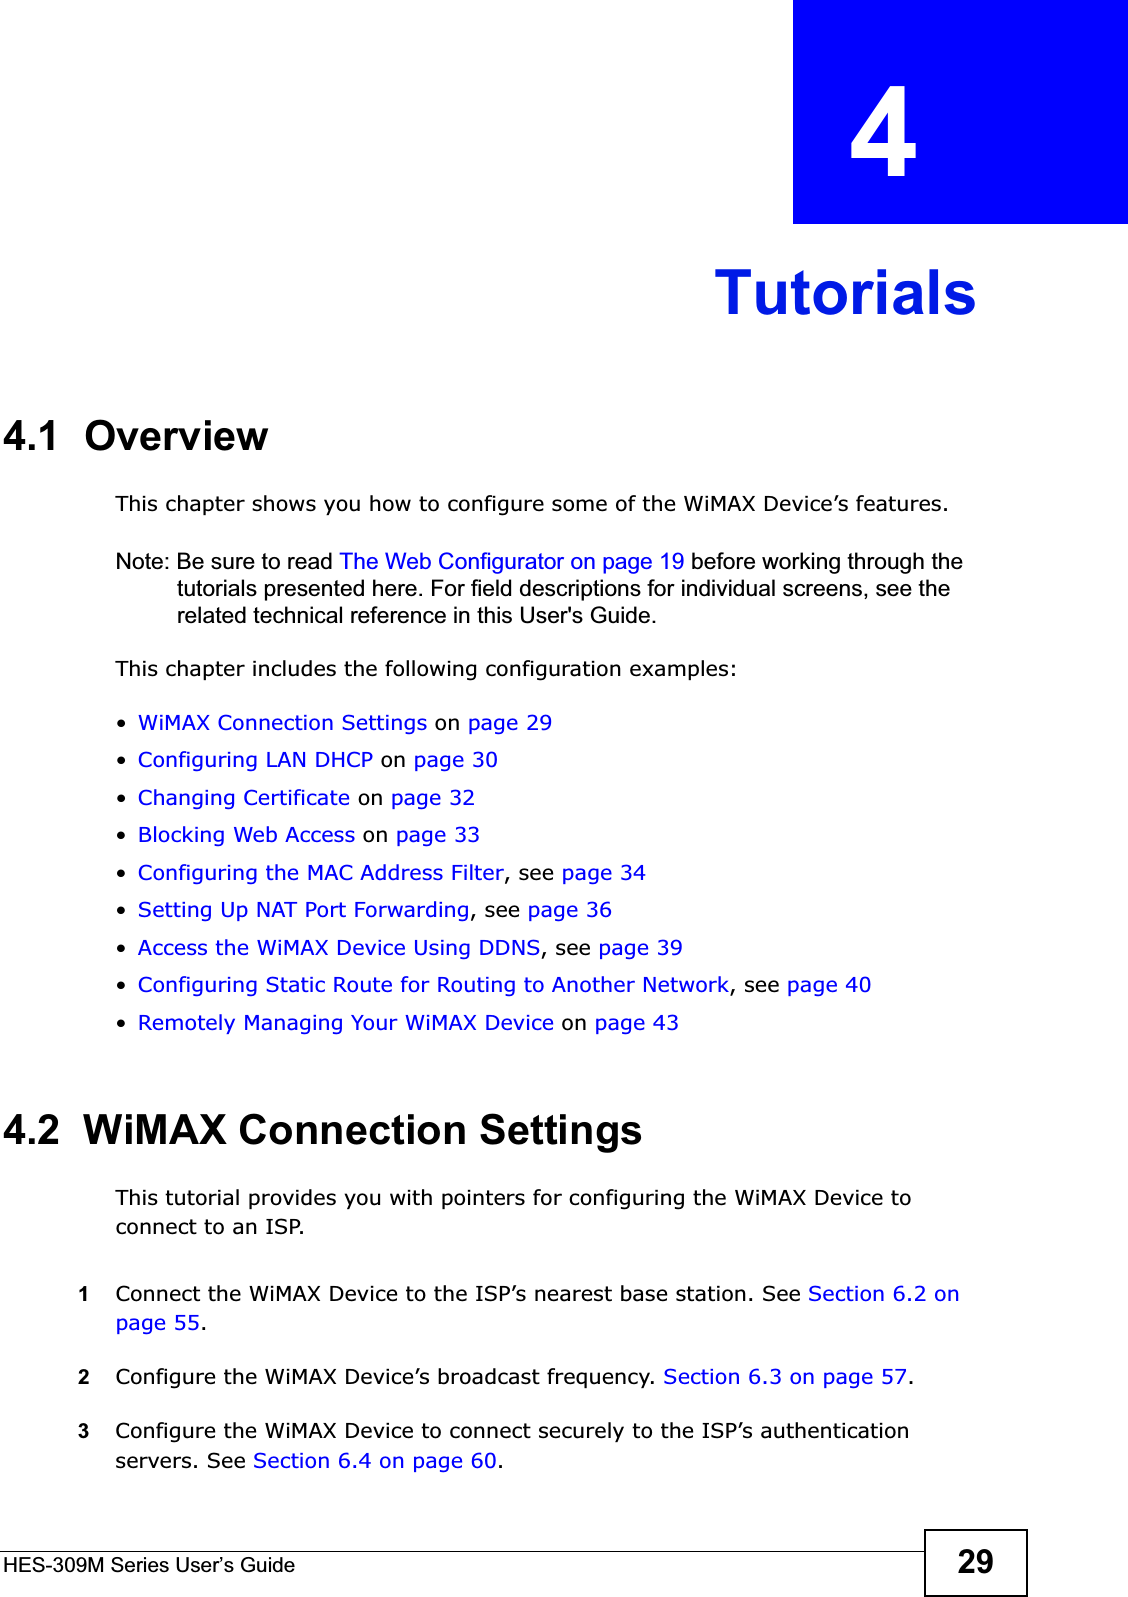 HES-309M Series User’s Guide 29CHAPTER  4 Tutorials4.1  OverviewThis chapter shows you how to configure some of the WiMAX Device’s features.Note: Be sure to read The Web Configurator on page 19 before working through the tutorials presented here. For field descriptions for individual screens, see the related technical reference in this User&apos;s Guide.This chapter includes the following configuration examples:•WiMAX Connection Settings on page 29•Configuring LAN DHCP on page 30•Changing Certificate on page 32•Blocking Web Access on page 33•Configuring the MAC Address Filter, see page 34•Setting Up NAT Port Forwarding, see page 36•Access the WiMAX Device Using DDNS, see page 39•Configuring Static Route for Routing to Another Network, see page 40•Remotely Managing Your WiMAX Device on page 434.2  WiMAX Connection SettingsThis tutorial provides you with pointers for configuring the WiMAX Device to connect to an ISP.1Connect the WiMAX Device to the ISP’s nearest base station. See Section 6.2 on page 55.2Configure the WiMAX Device’s broadcast frequency. Section 6.3 on page 57.3Configure the WiMAX Device to connect securely to the ISP’s authentication servers. See Section 6.4 on page 60.